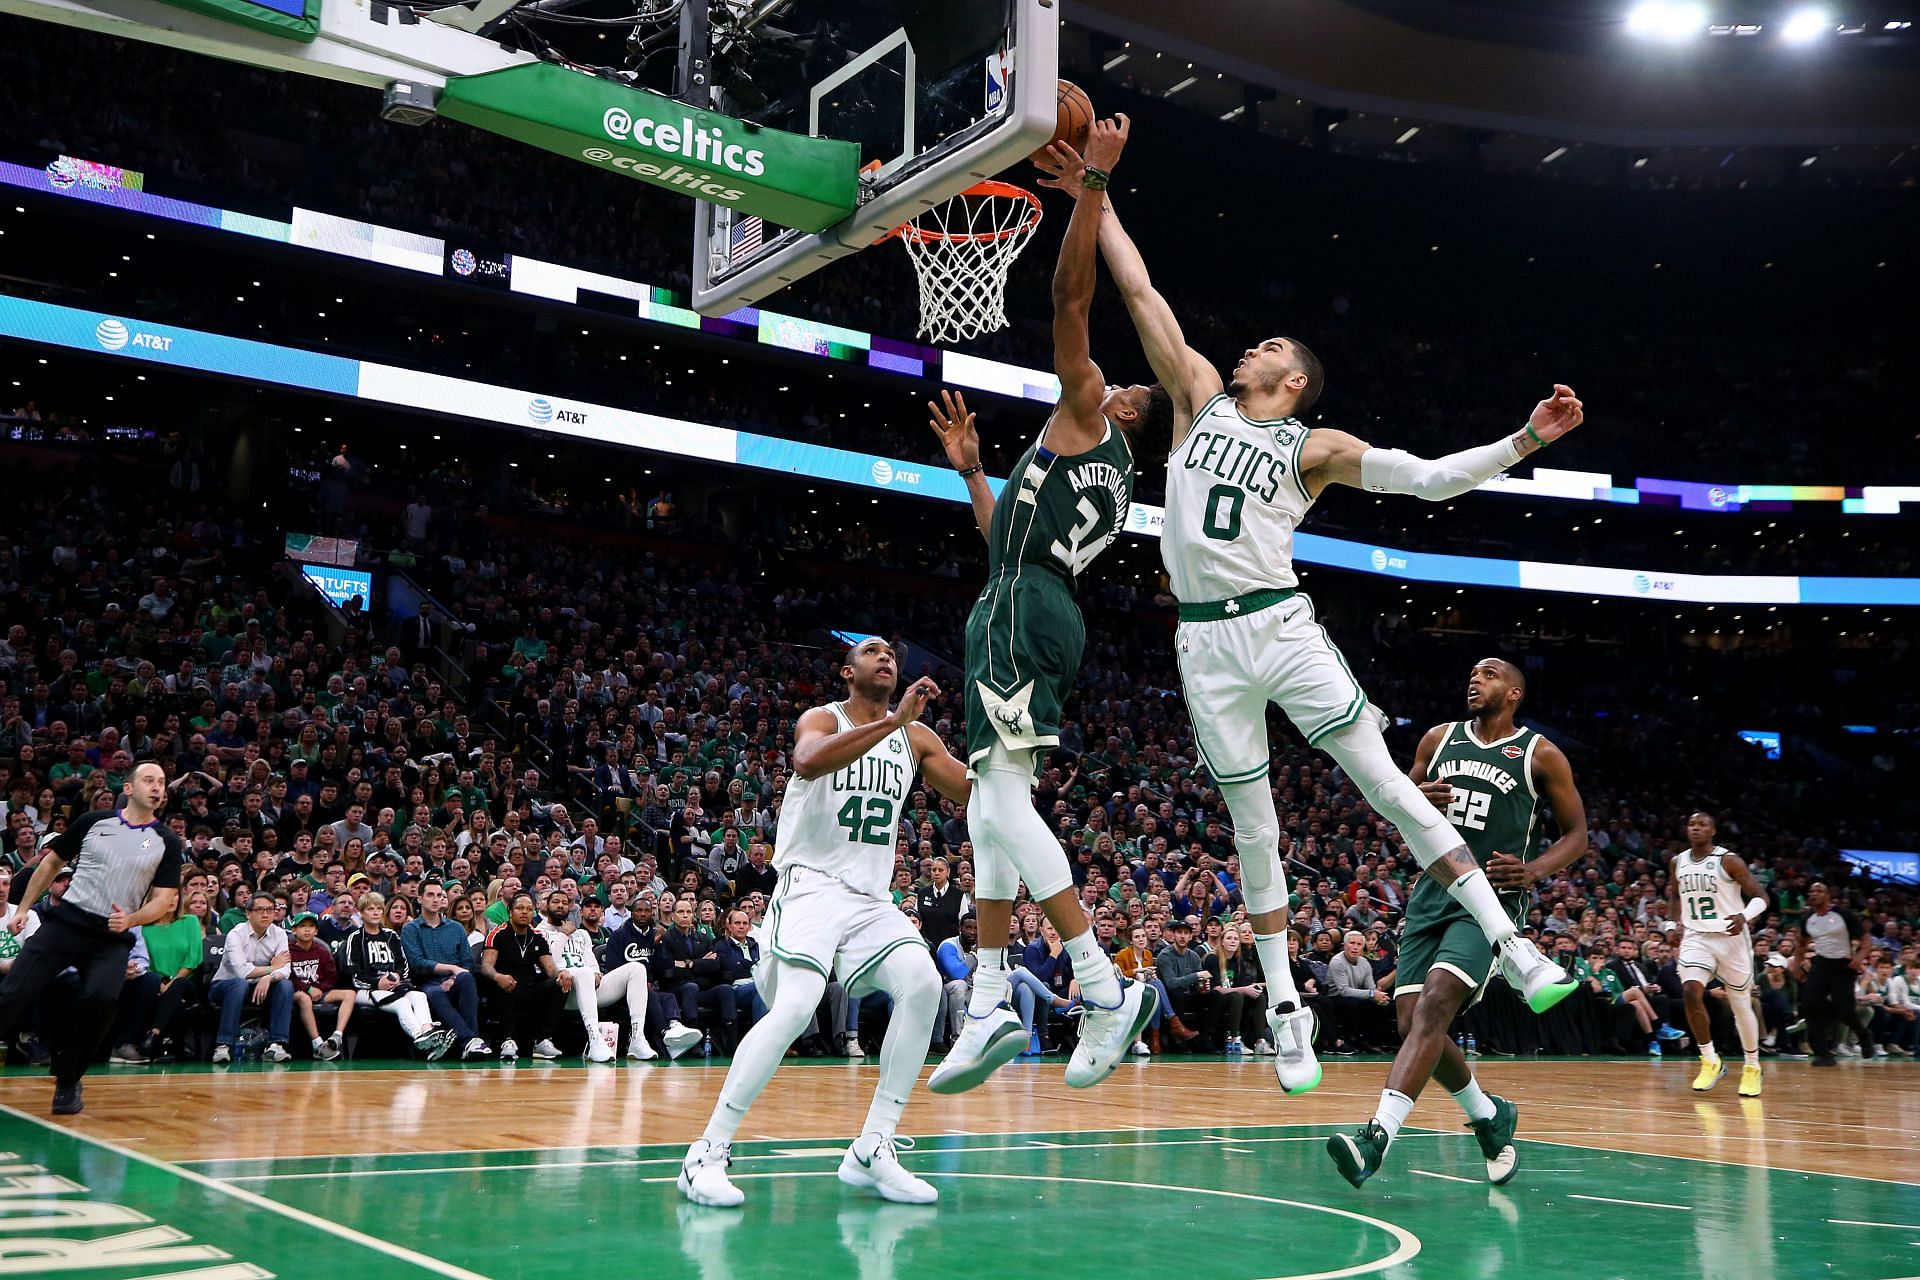 Jayson Tatum #0 of the Boston Celtics defends a shot from Giannis Antetokounmpo #34 of the Milwaukee Bucks during the second half of Game 3 of the Eastern Conference Semifinals of the 2019 NBA Playoffs at TD Garden on May 03, 2019 in Boston, Massachusetts. The Bucks defeat the Celtics 123 - 116.